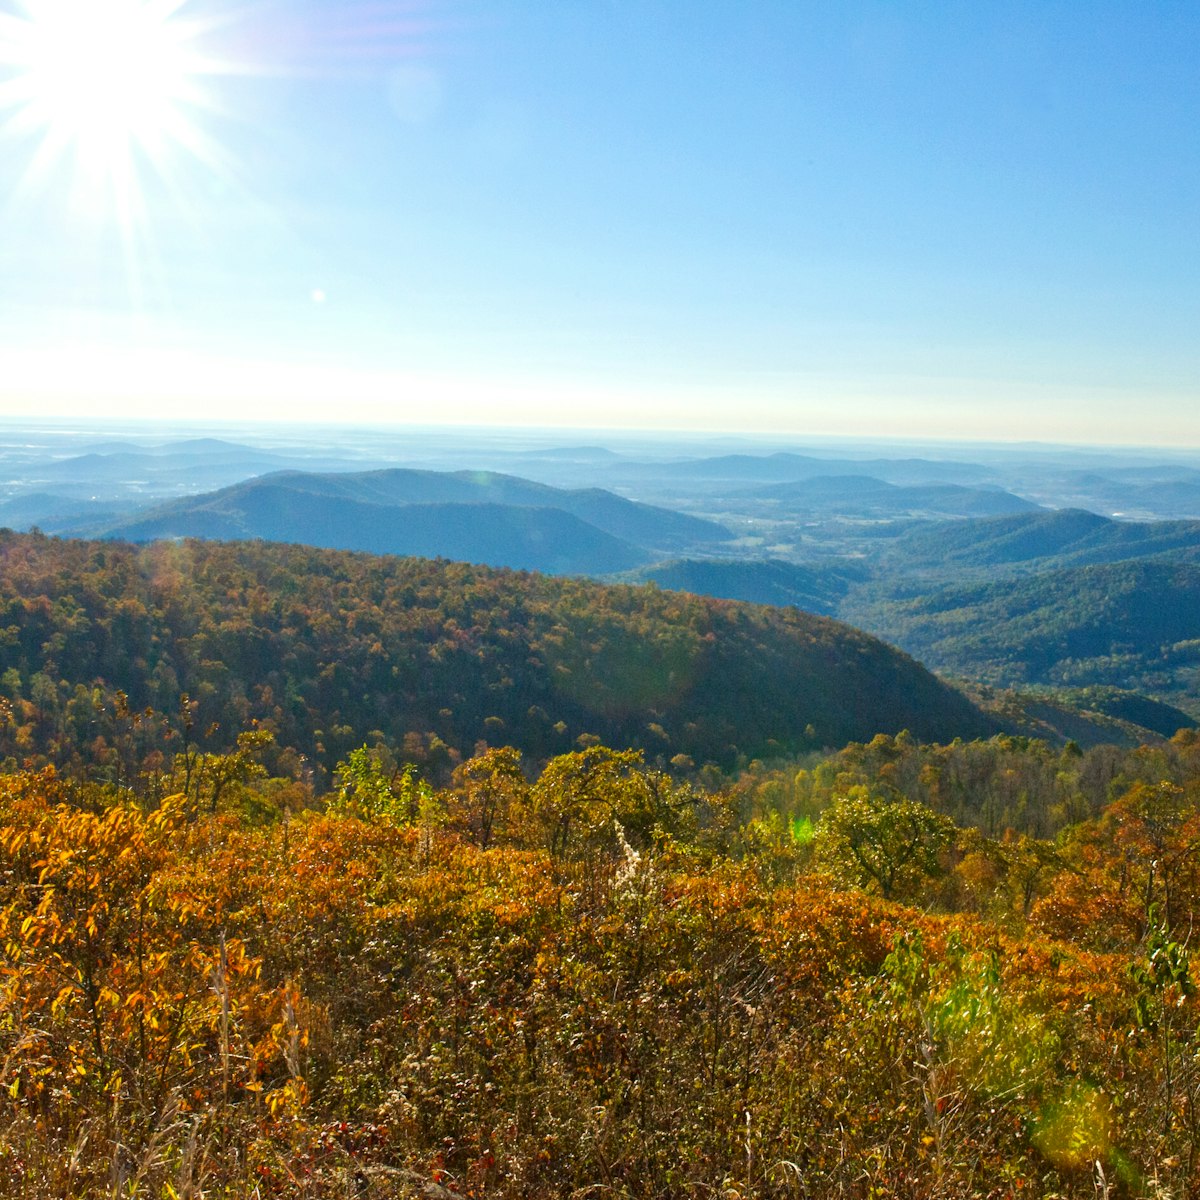 Trees at the peak of Fall color are seen looking out over the Piedmont October 26, 2013 from Shenandoah National Park in Virginia.  AFP PHOTO / Karen BLEIER        (Photo credit should read KAREN BLEIER/AFP/Getty Images)